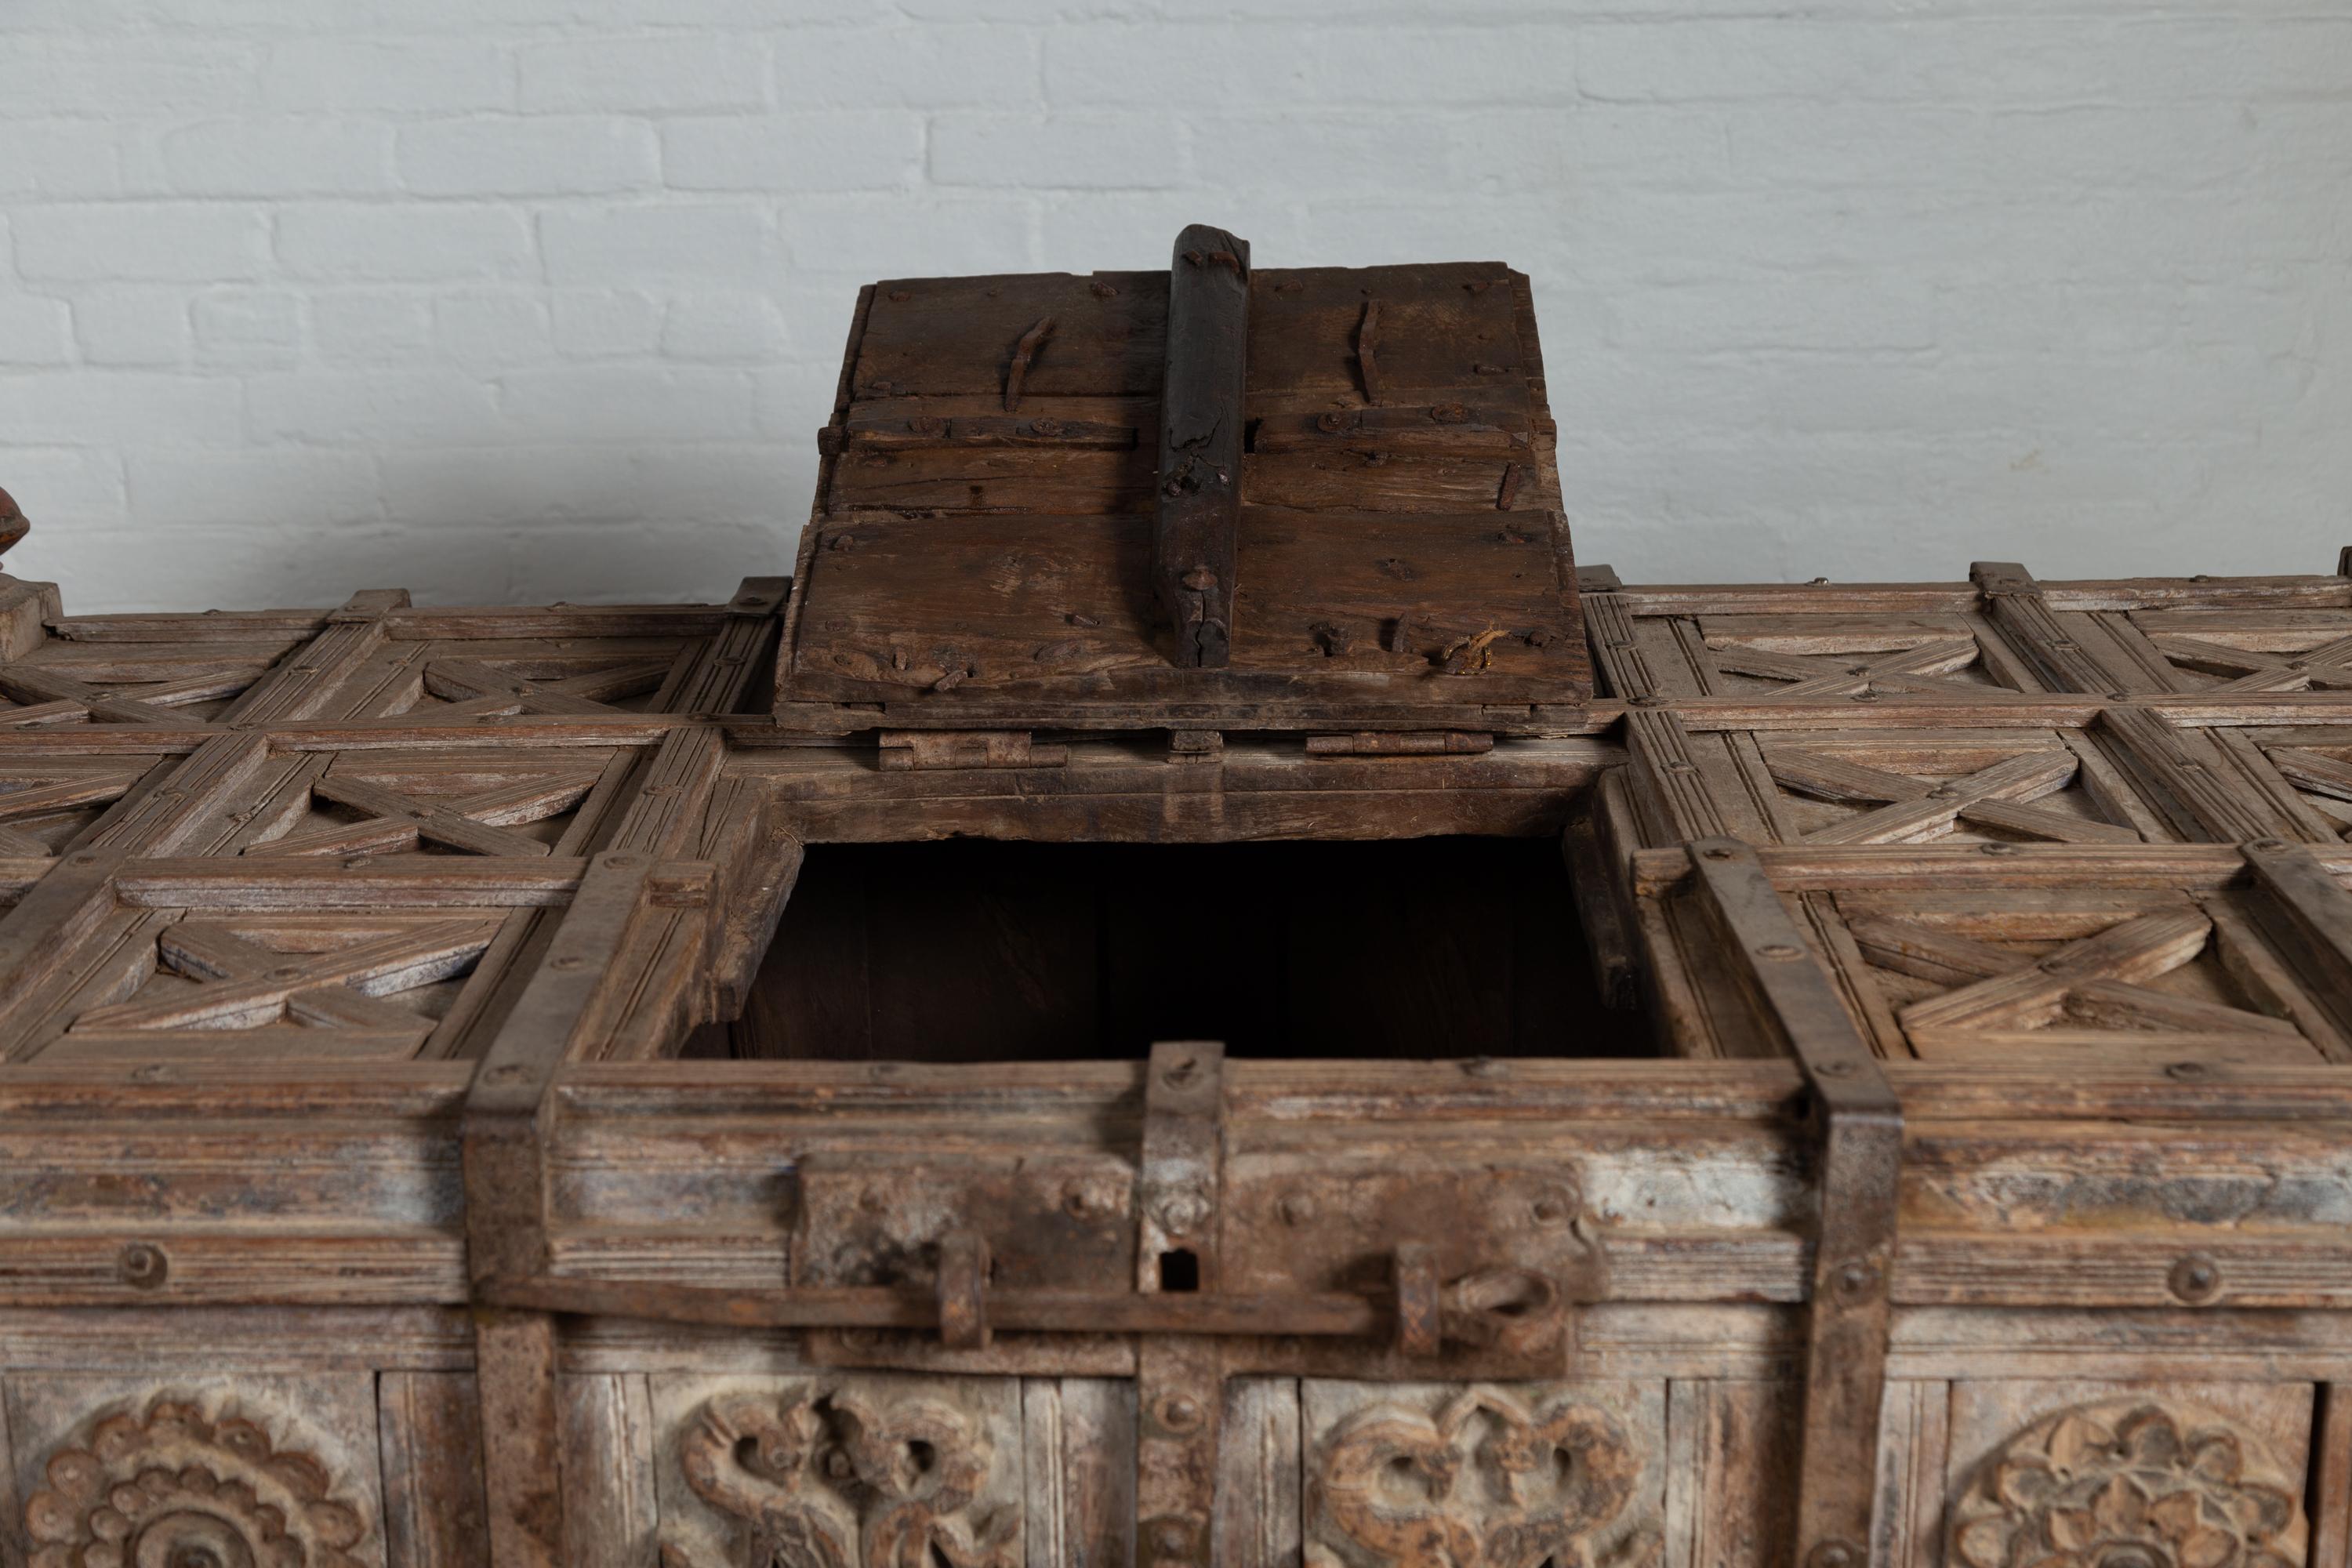 Oversized Indian Treasure Chest with Raised X Patterns, Rosettes and Animals 11